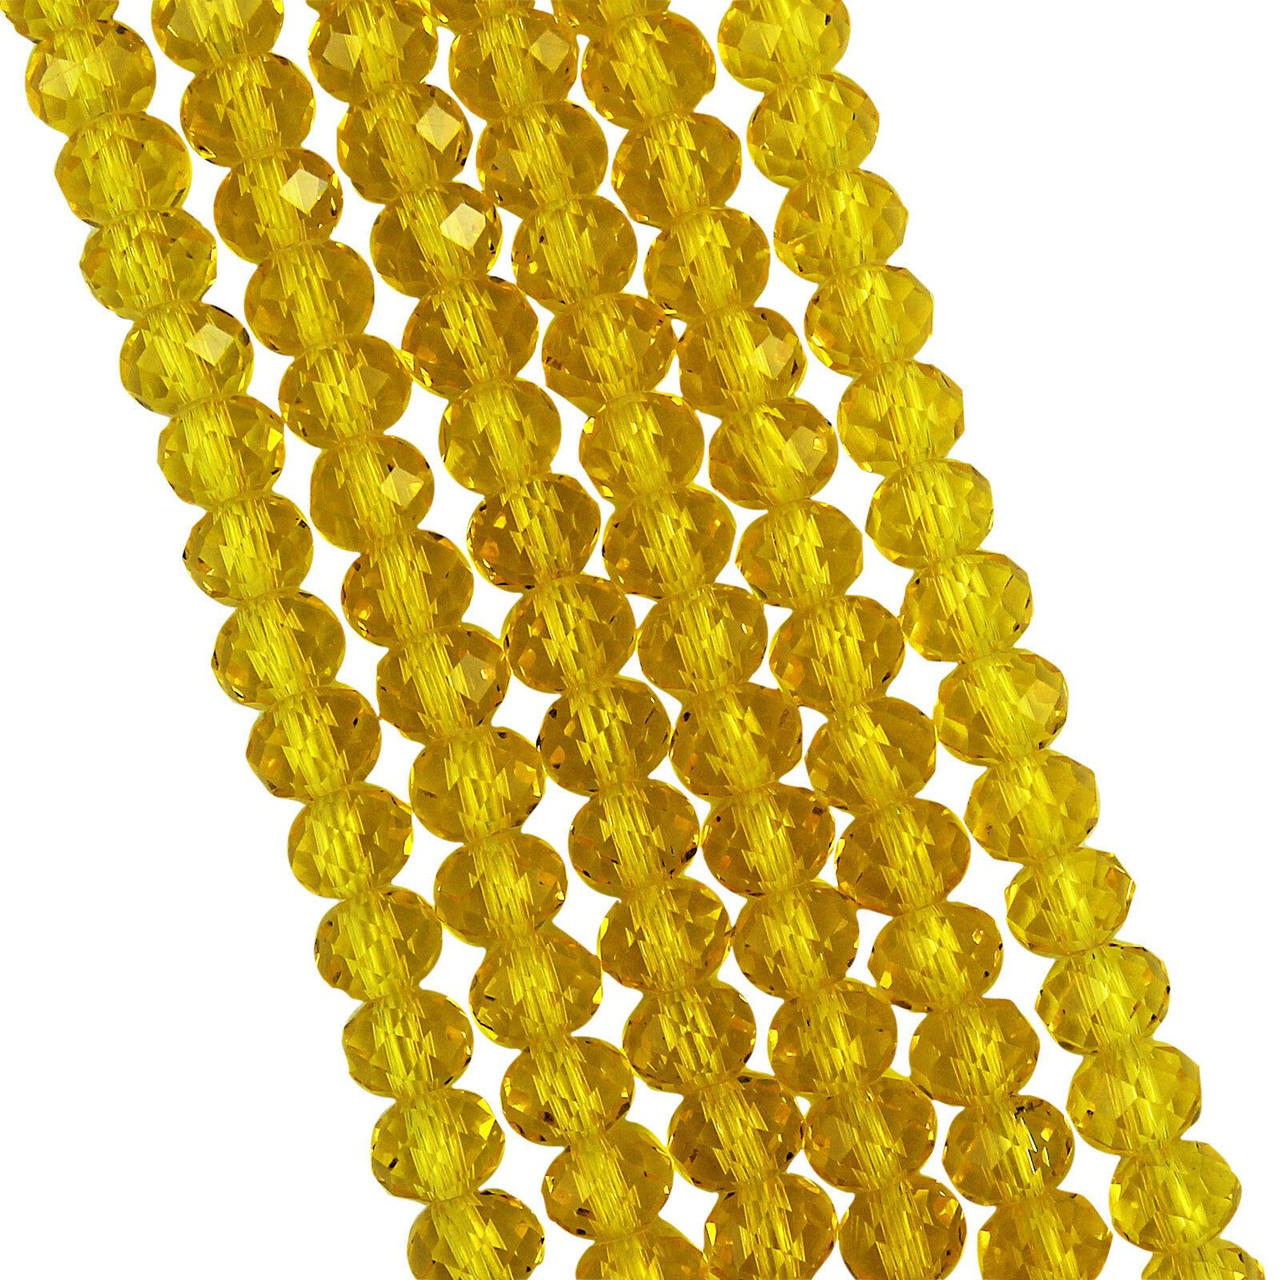 8x6mm Faceted Glass Rondelles - YELLOW - approx 72 beads / 17 inch strand